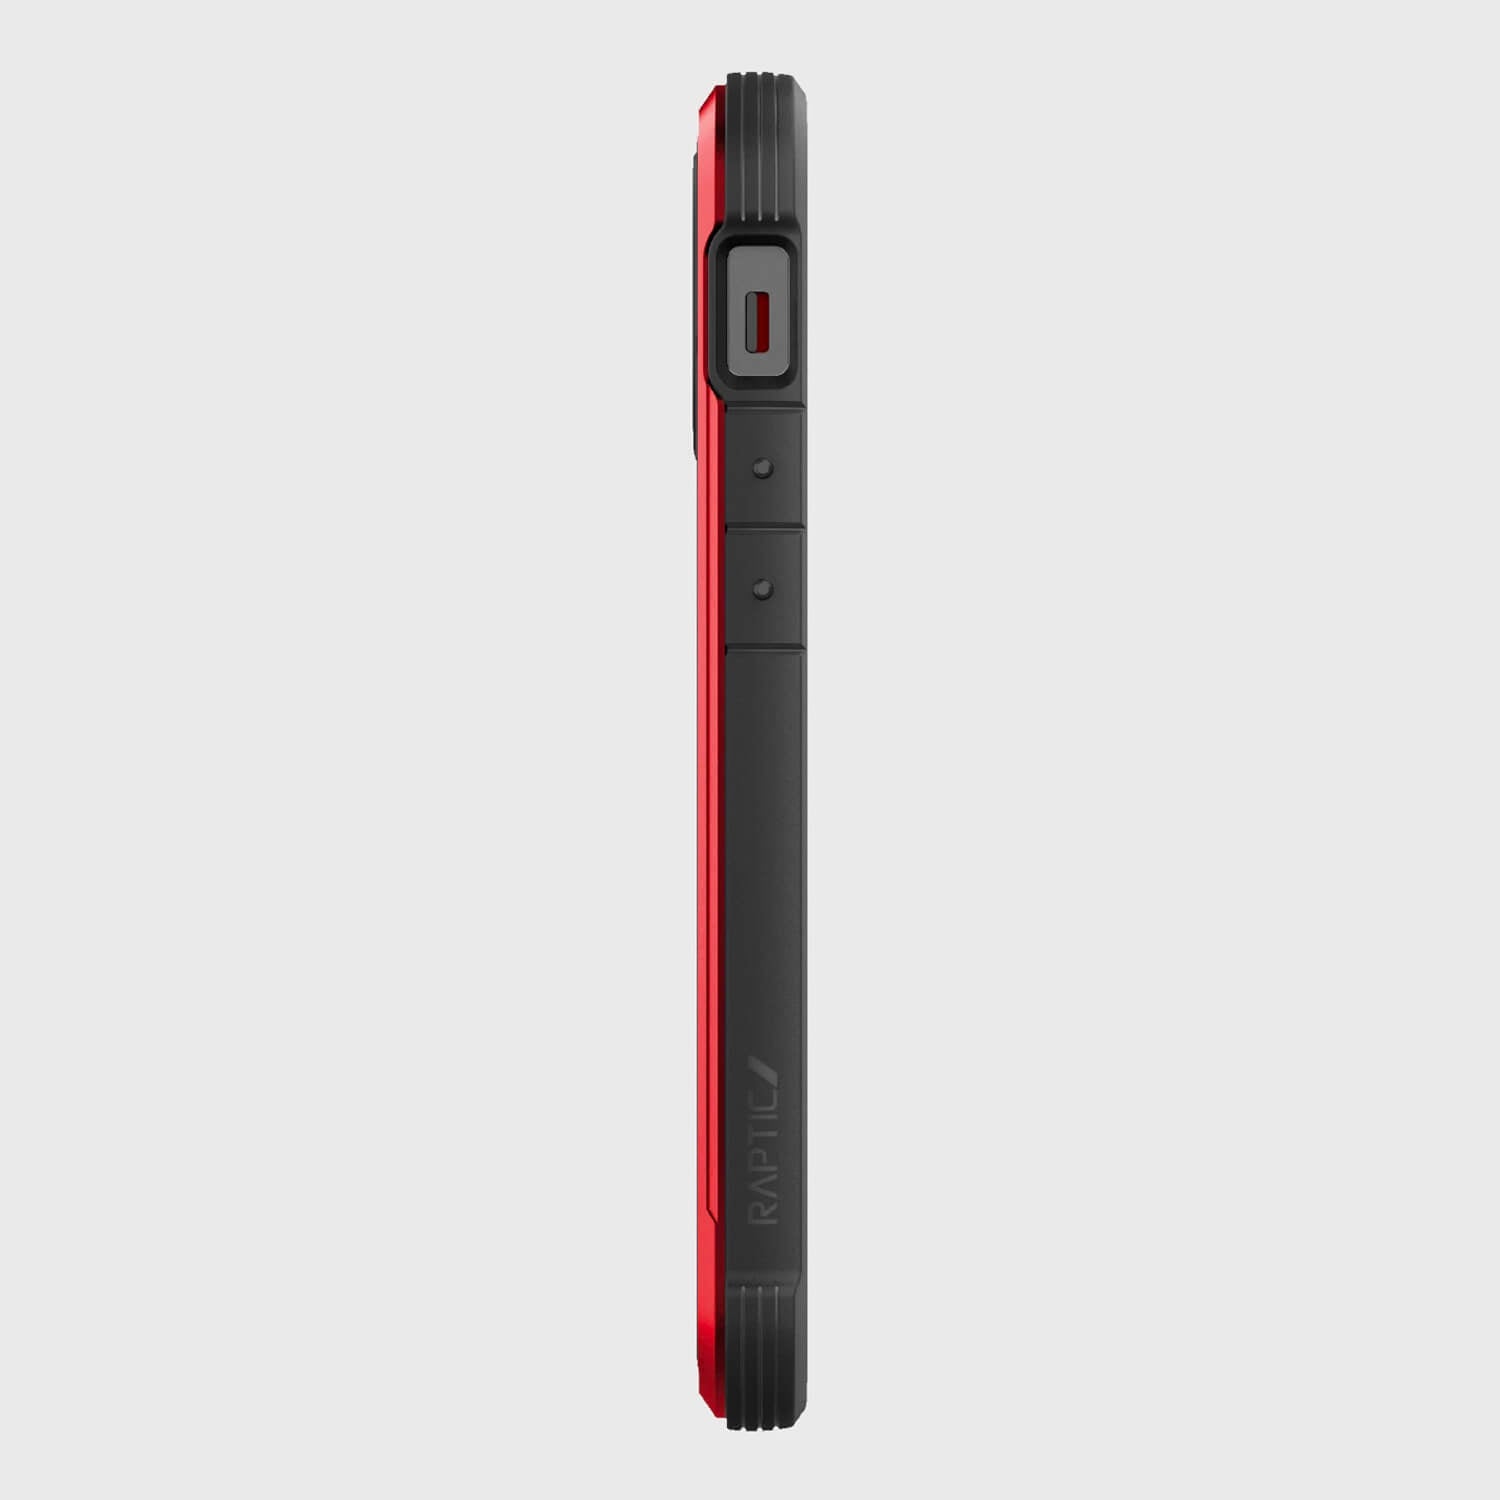 Raptic iPhone 13 Case Shield Pro AntiMicrobial Red